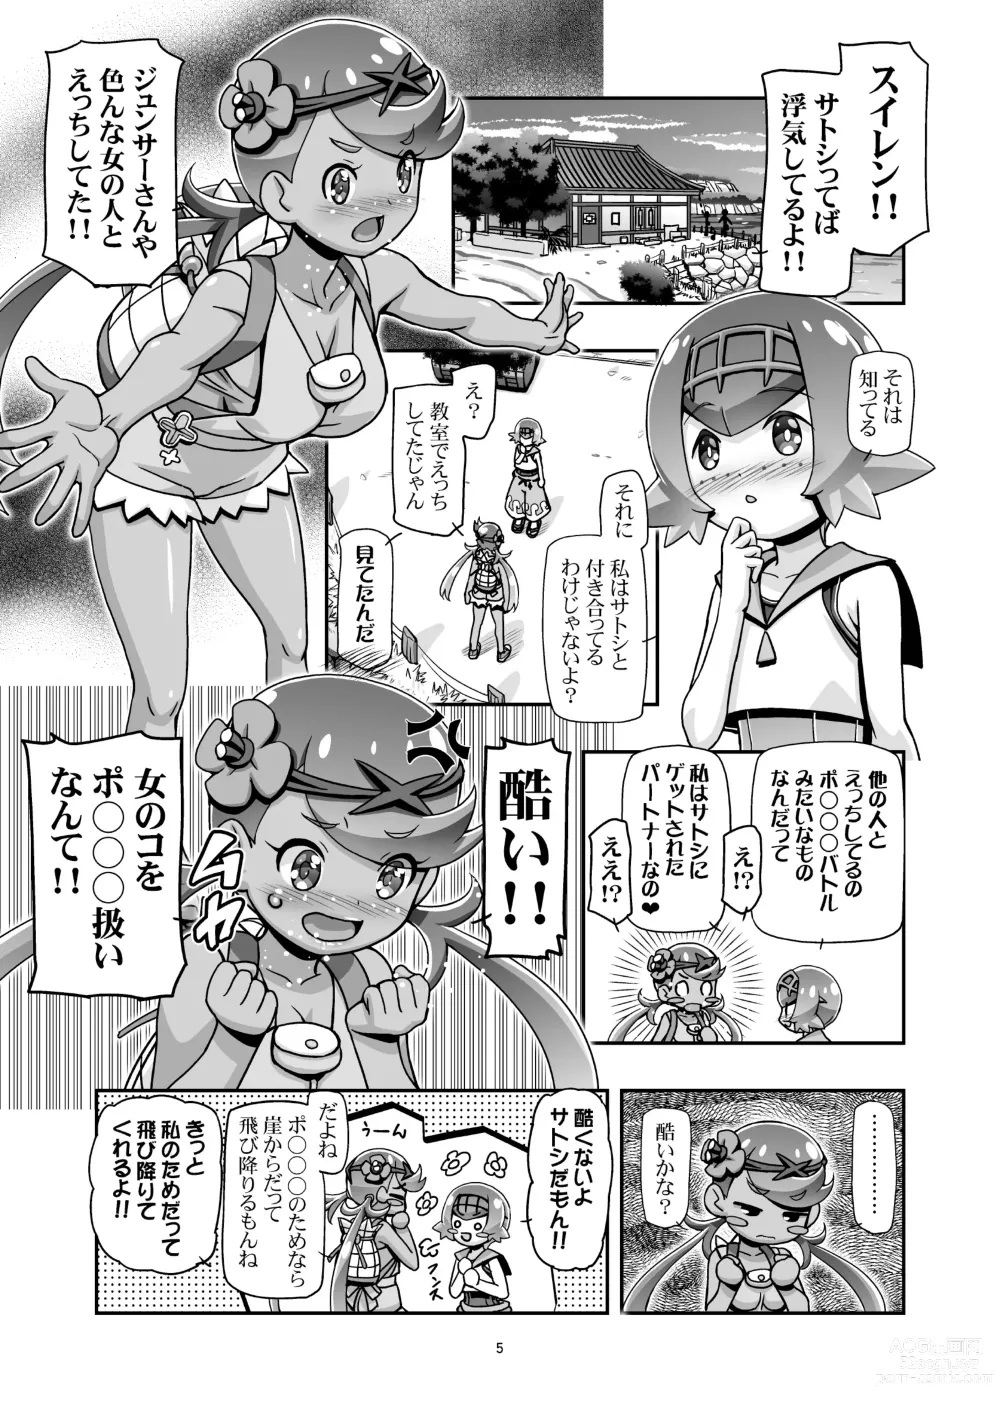 Page 4 of doujinshi PM GALS SUNMOON MALLOW